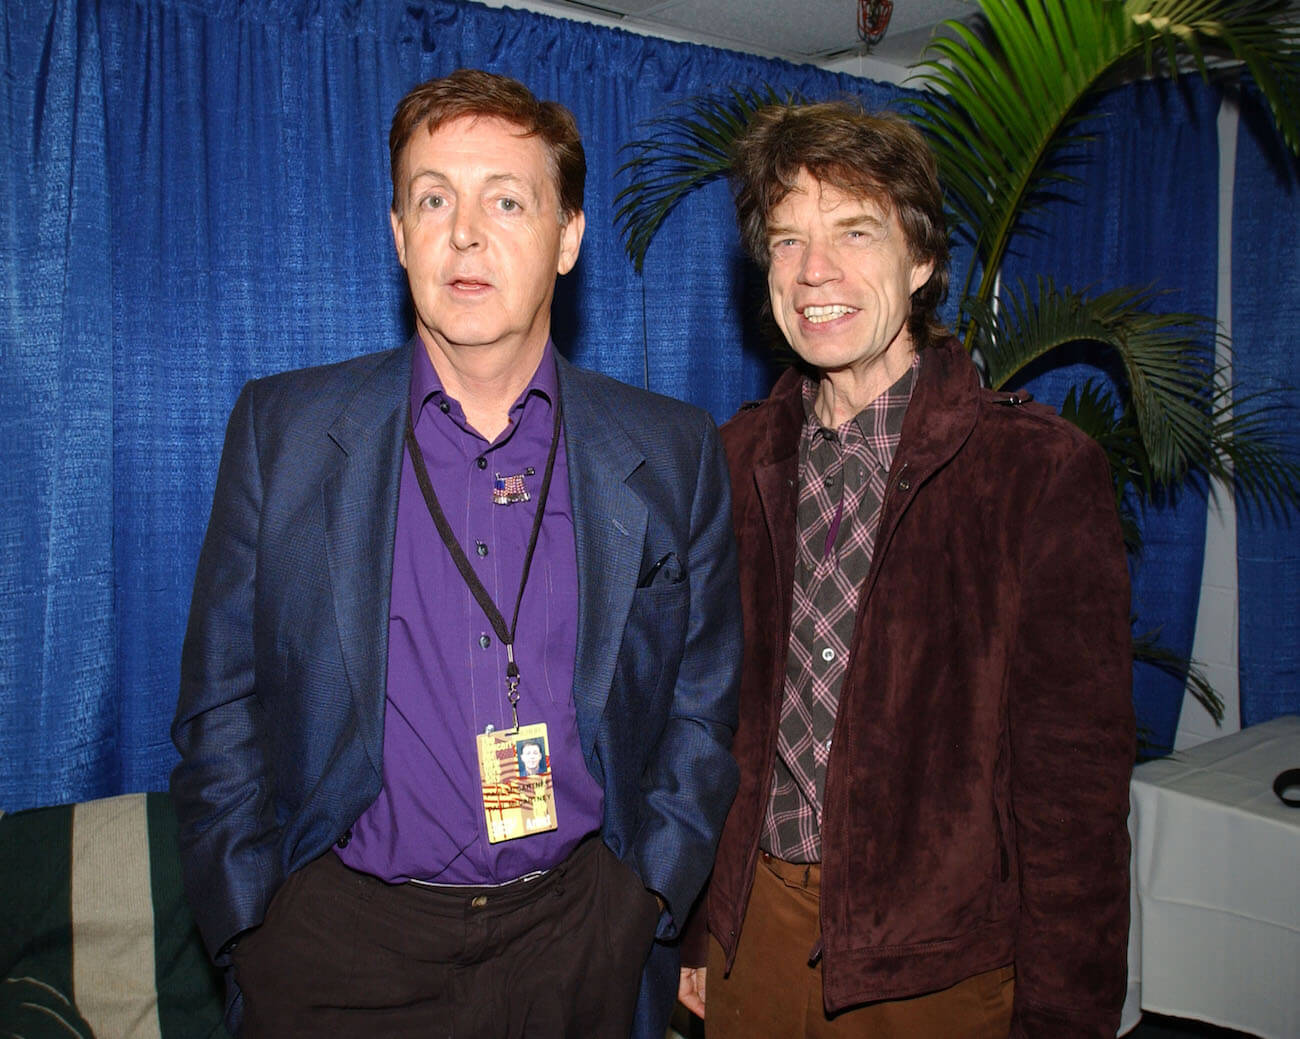 Paul McCartney of The Beatles and Mick Jagger of The Rolling Stones at an event in 2001. 